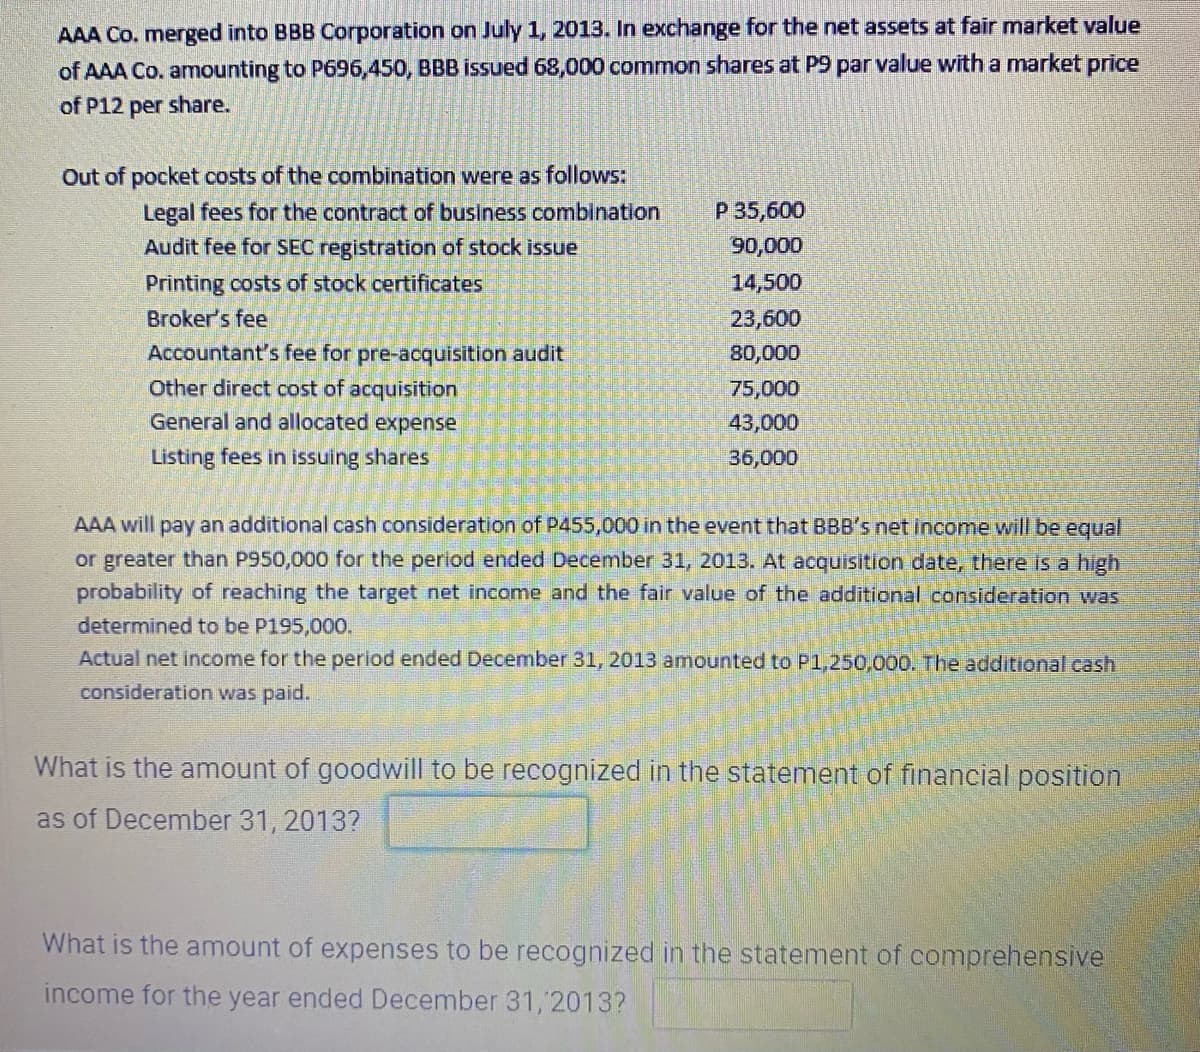 AAA Co. merged into BBB Corporation on July 1, 2013. In exchange for the net assets at fair market value
of AAA Co. amounting to P696,450, BBB issued 68,000 common shares at P9 par value with a market price
of P12 per share.
Out of pocket costs of the combination were as follows:
Legal fees for the contract of business combination
P 35,600
Audit fee for SEC registration of stock issue
90,000
Printing costs of stock certificates
14,500
Broker's fee
23,600
Accountant's fee for pre-acquisition audit
80,000
Other direct cost of acquisition
General and allocated expense
75,000
43,000
Listing fees in issuing shares
36,000
AAA will pay an additional cash consideration of P455,000 in the event that BBB's net income will be equal
or greater than P950,000 for the period ended December 31, 2013. At acquisition date, there is a high
probability of reaching the target net income and the fair value of the additional consideration was
determined to be P195,000.
Actual net income for the period ended December 31, 2013 amounted to P1,250,000. The additional cash
consideration was paid.
What is the amount of goodwill to be recognized in the statement of financial position
as of December 31, 2013?
What is the amount of expenses to be recognized in the statement of comprehensive
income for the year ended December 31, 2013?
